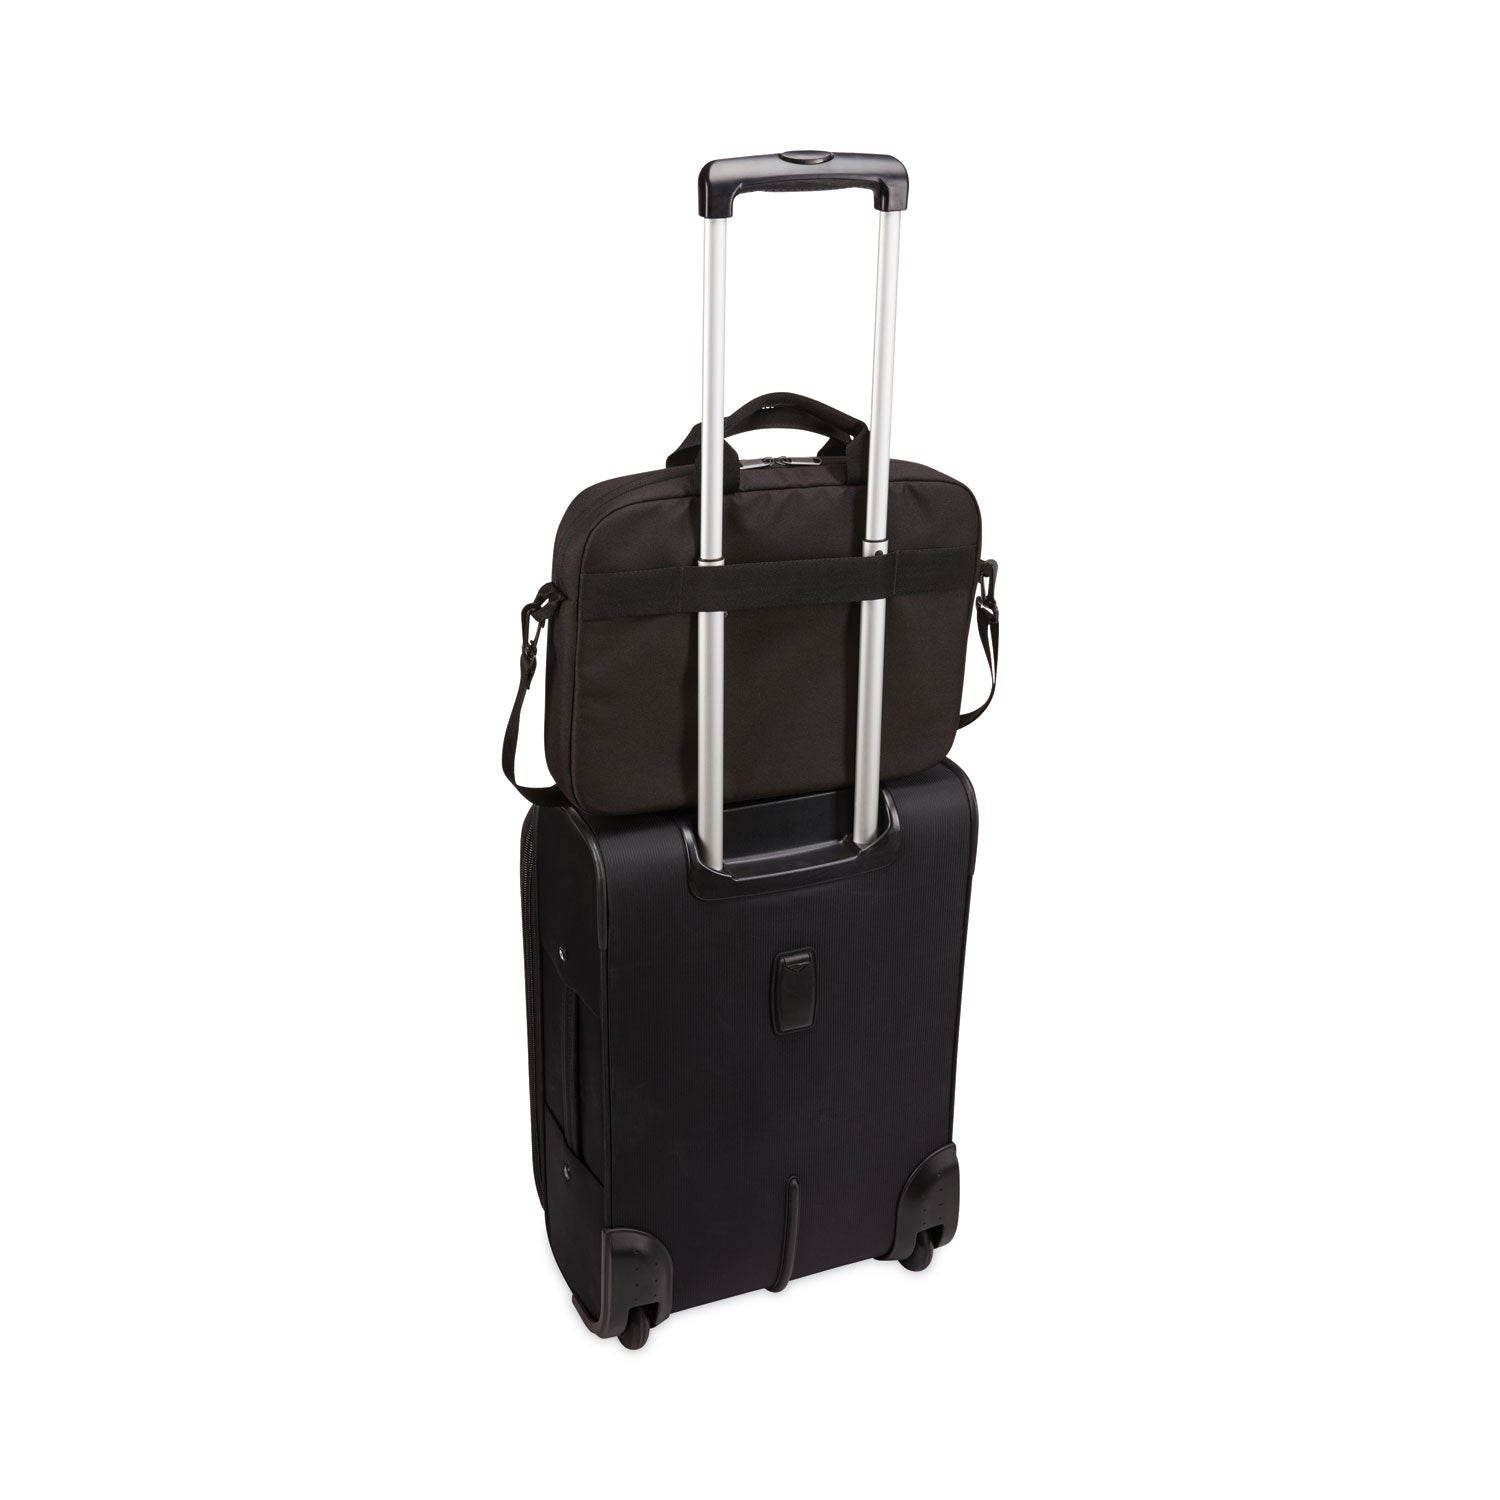 advantage-laptop-attache-fits-devices-up-to-156-polyester-161-x-28-x-138-black_clg3203988 - 6